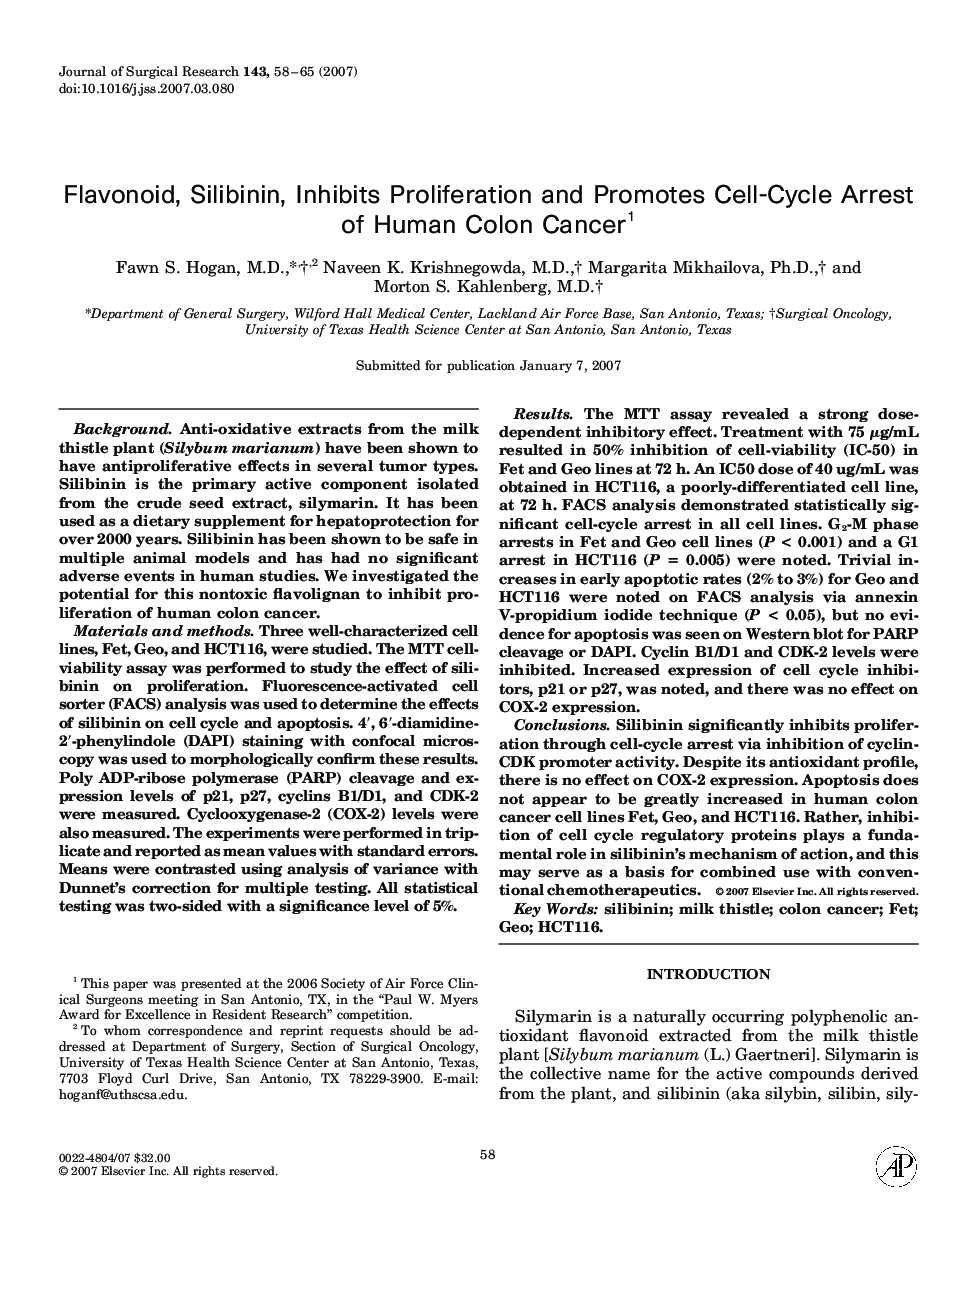 Flavonoid, Silibinin, Inhibits Proliferation and Promotes Cell-Cycle Arrest of Human Colon Cancer